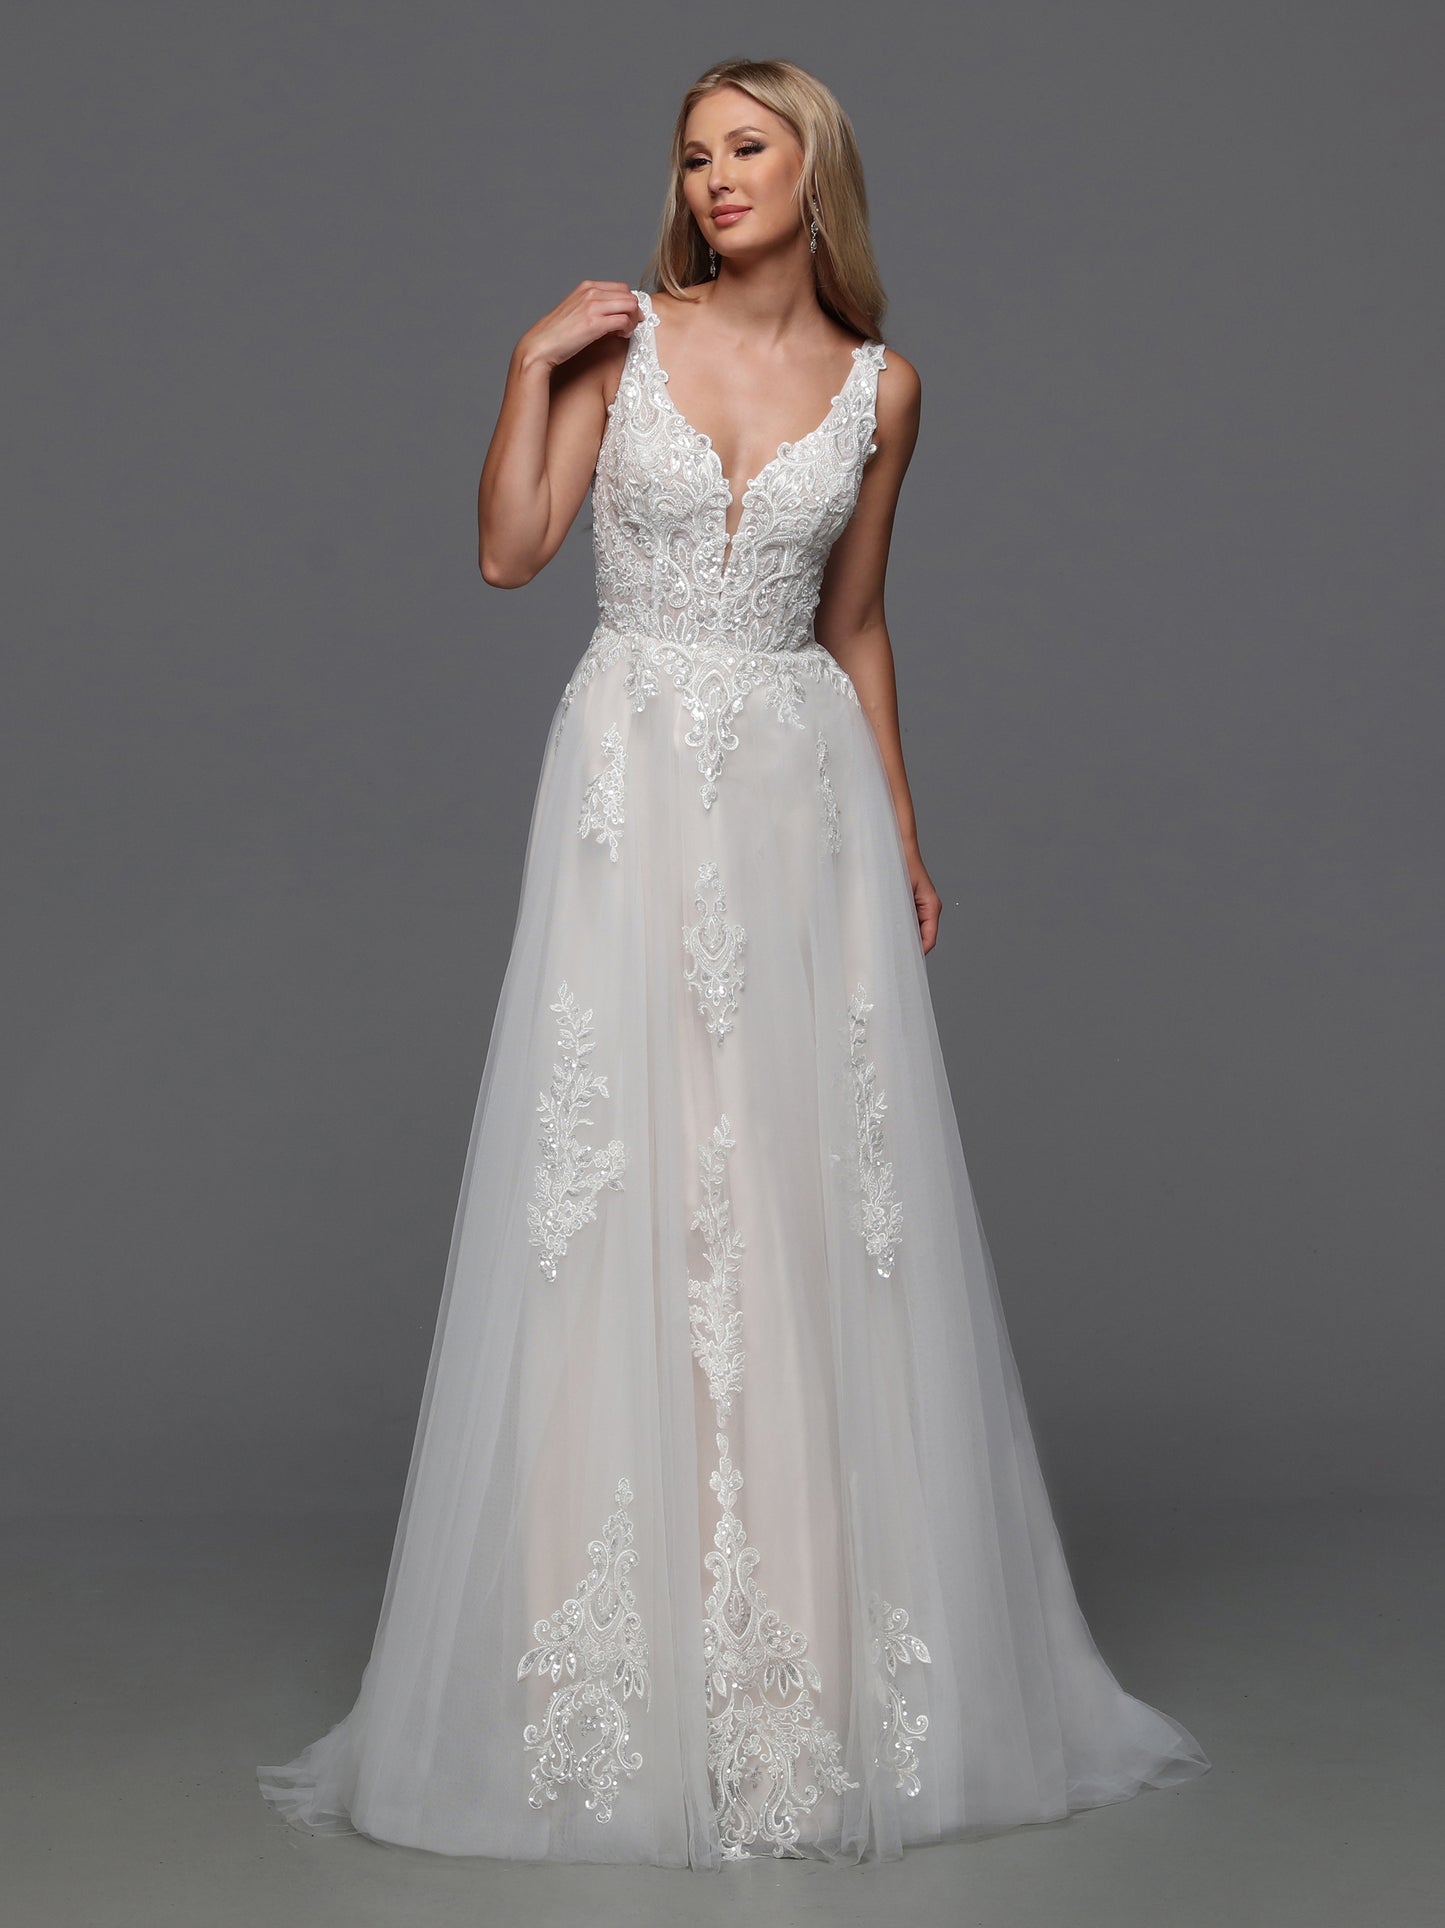 50849- Tulle/Lace/Beaded Appliquet